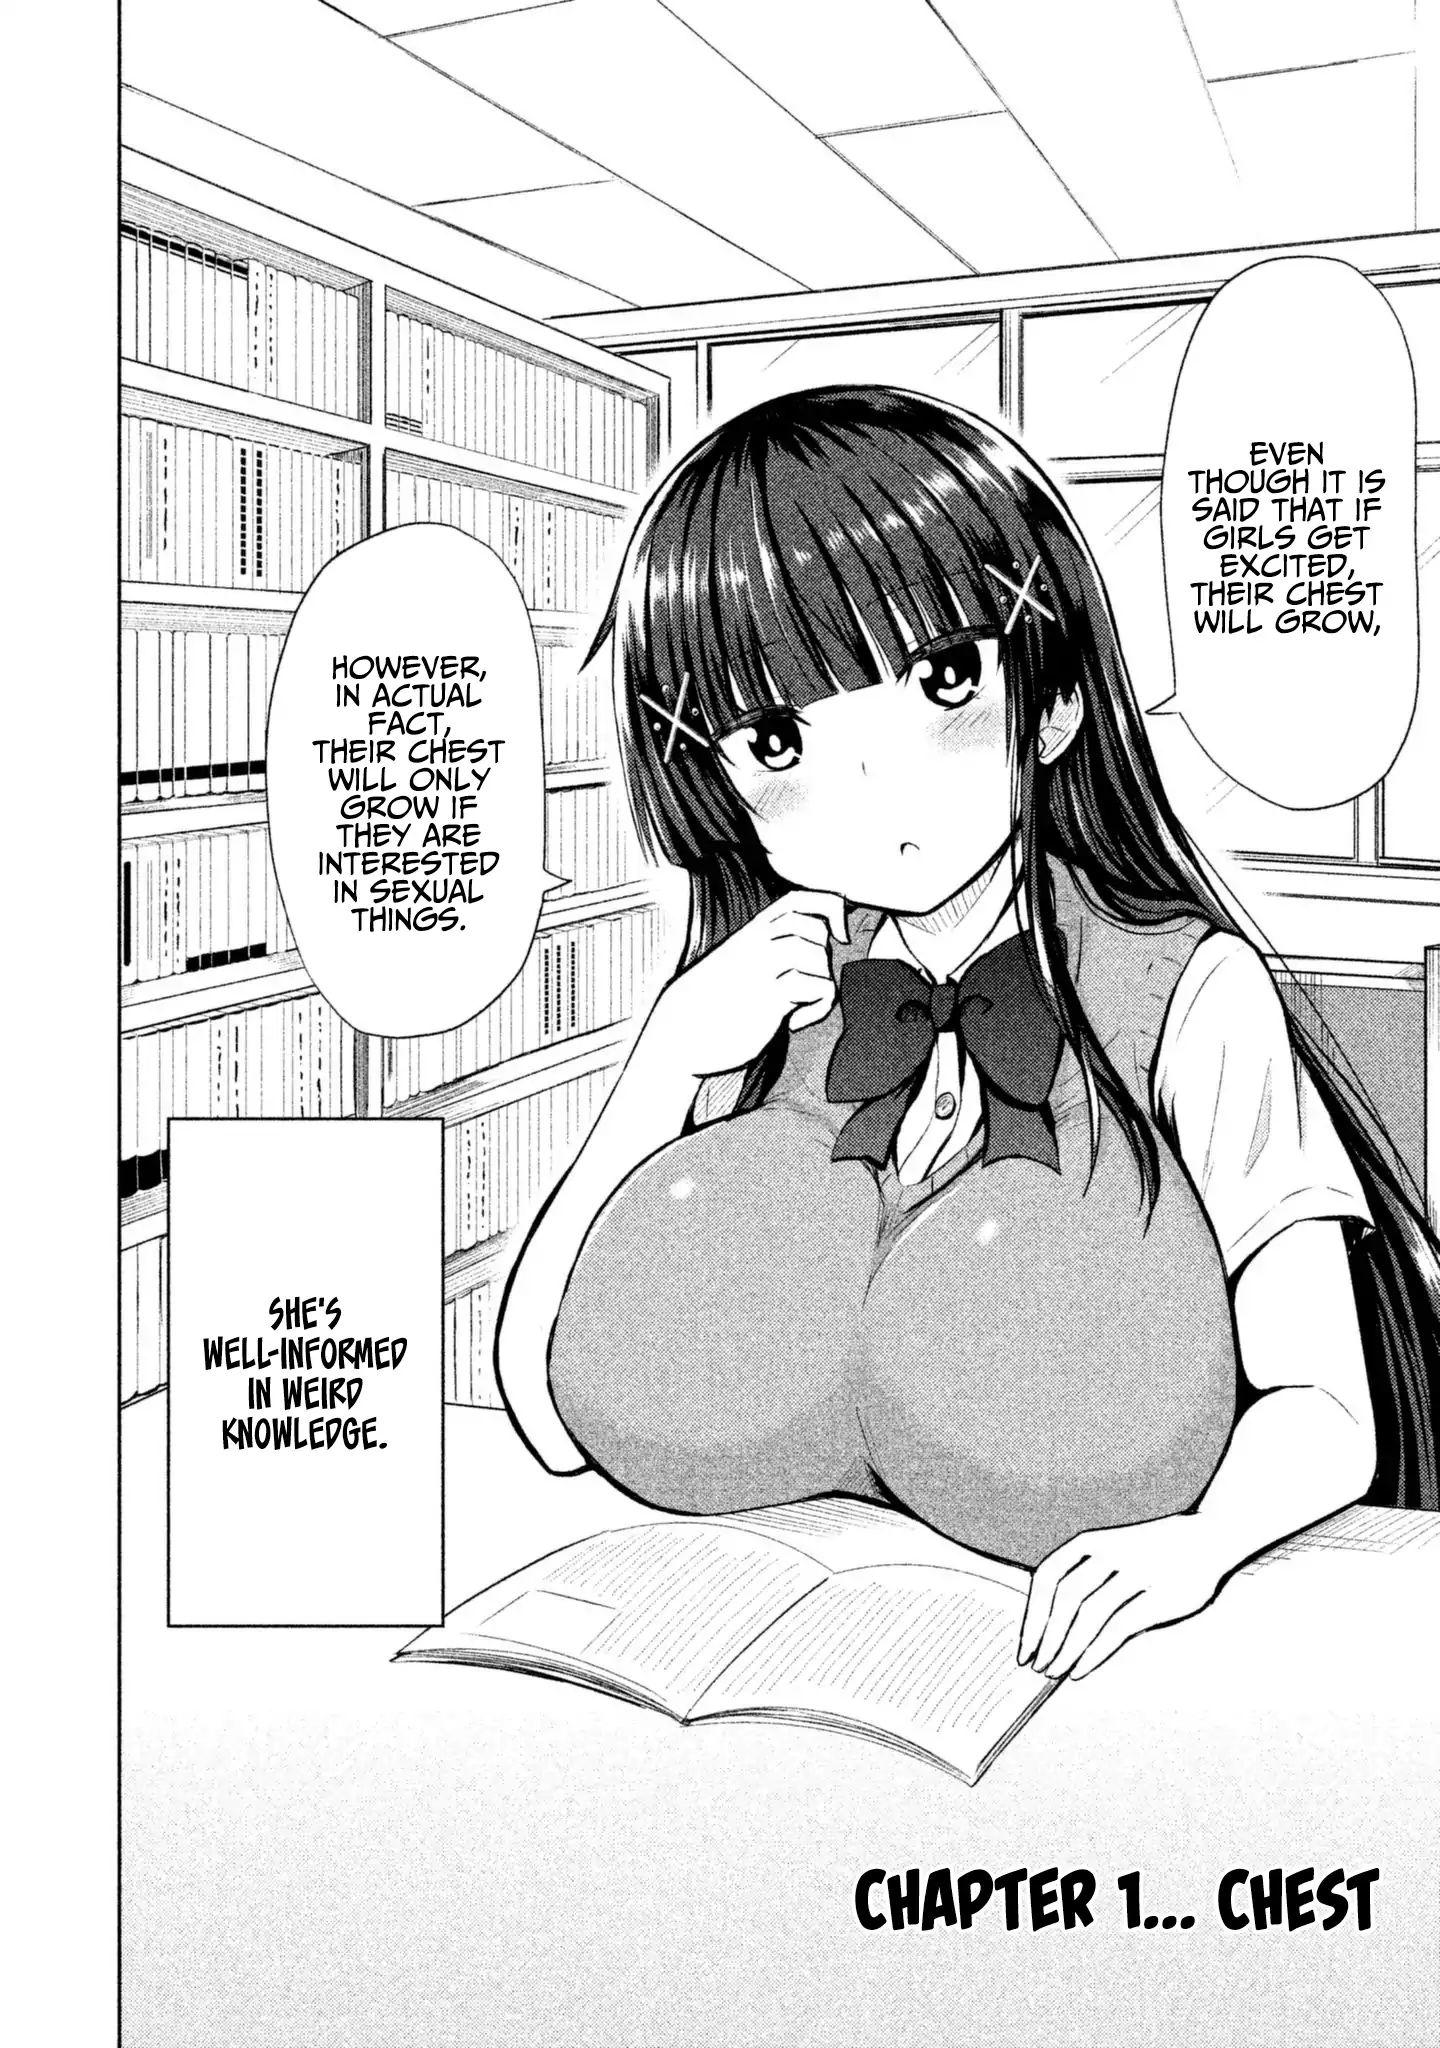 A Girl Who Is Very Well-Informed About Weird Knowledge, Takayukashiki Souko-San Vol.1 Chapter 1: Chest page 7 - Mangakakalots.com